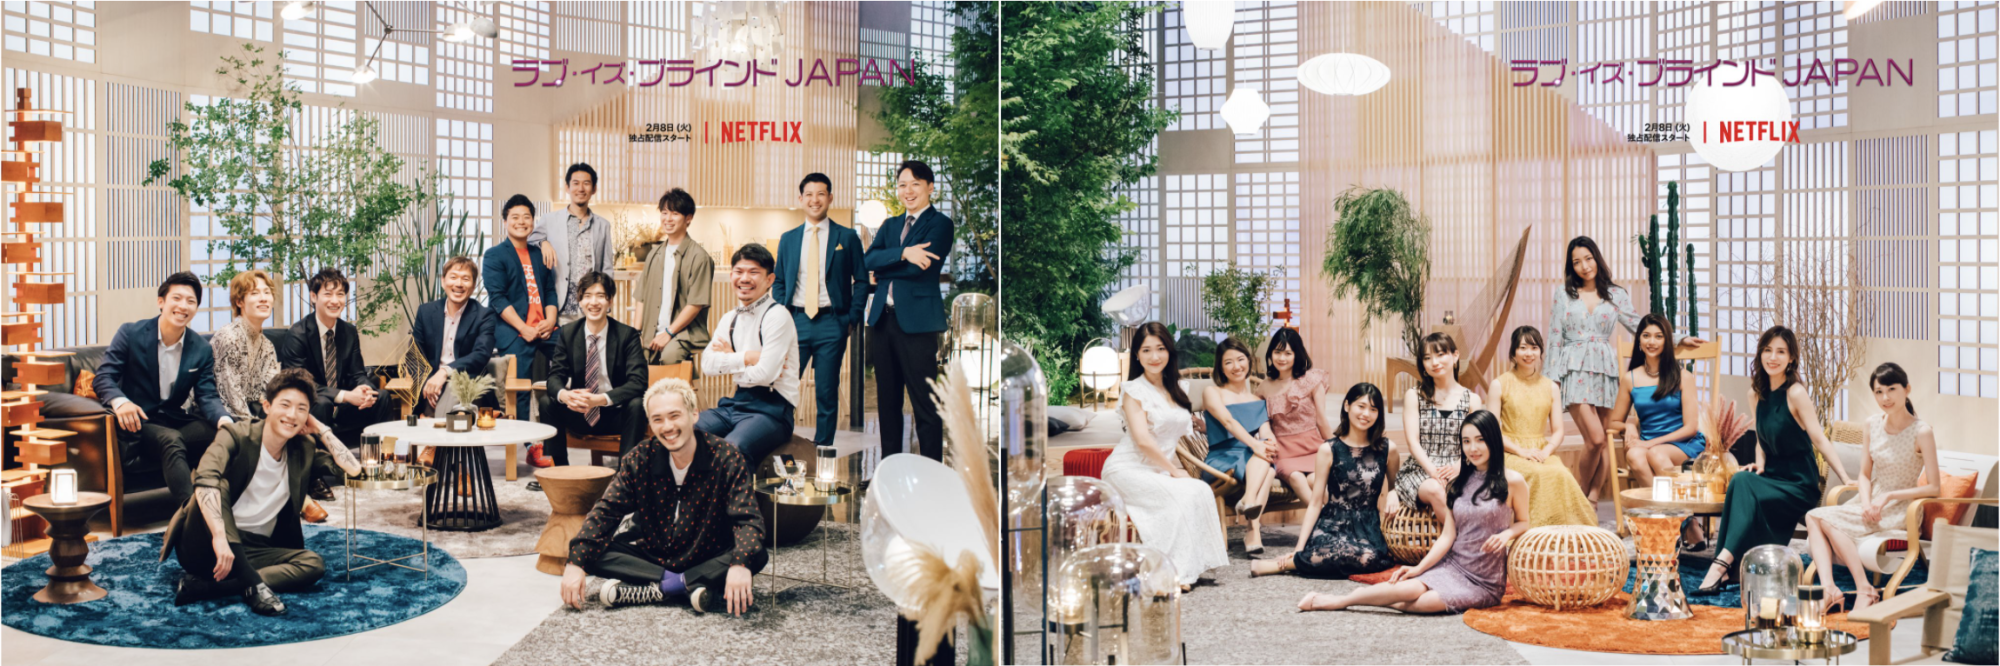 Netflix Taking 'Love is Blind' Dating Show to Japan - Media Play News